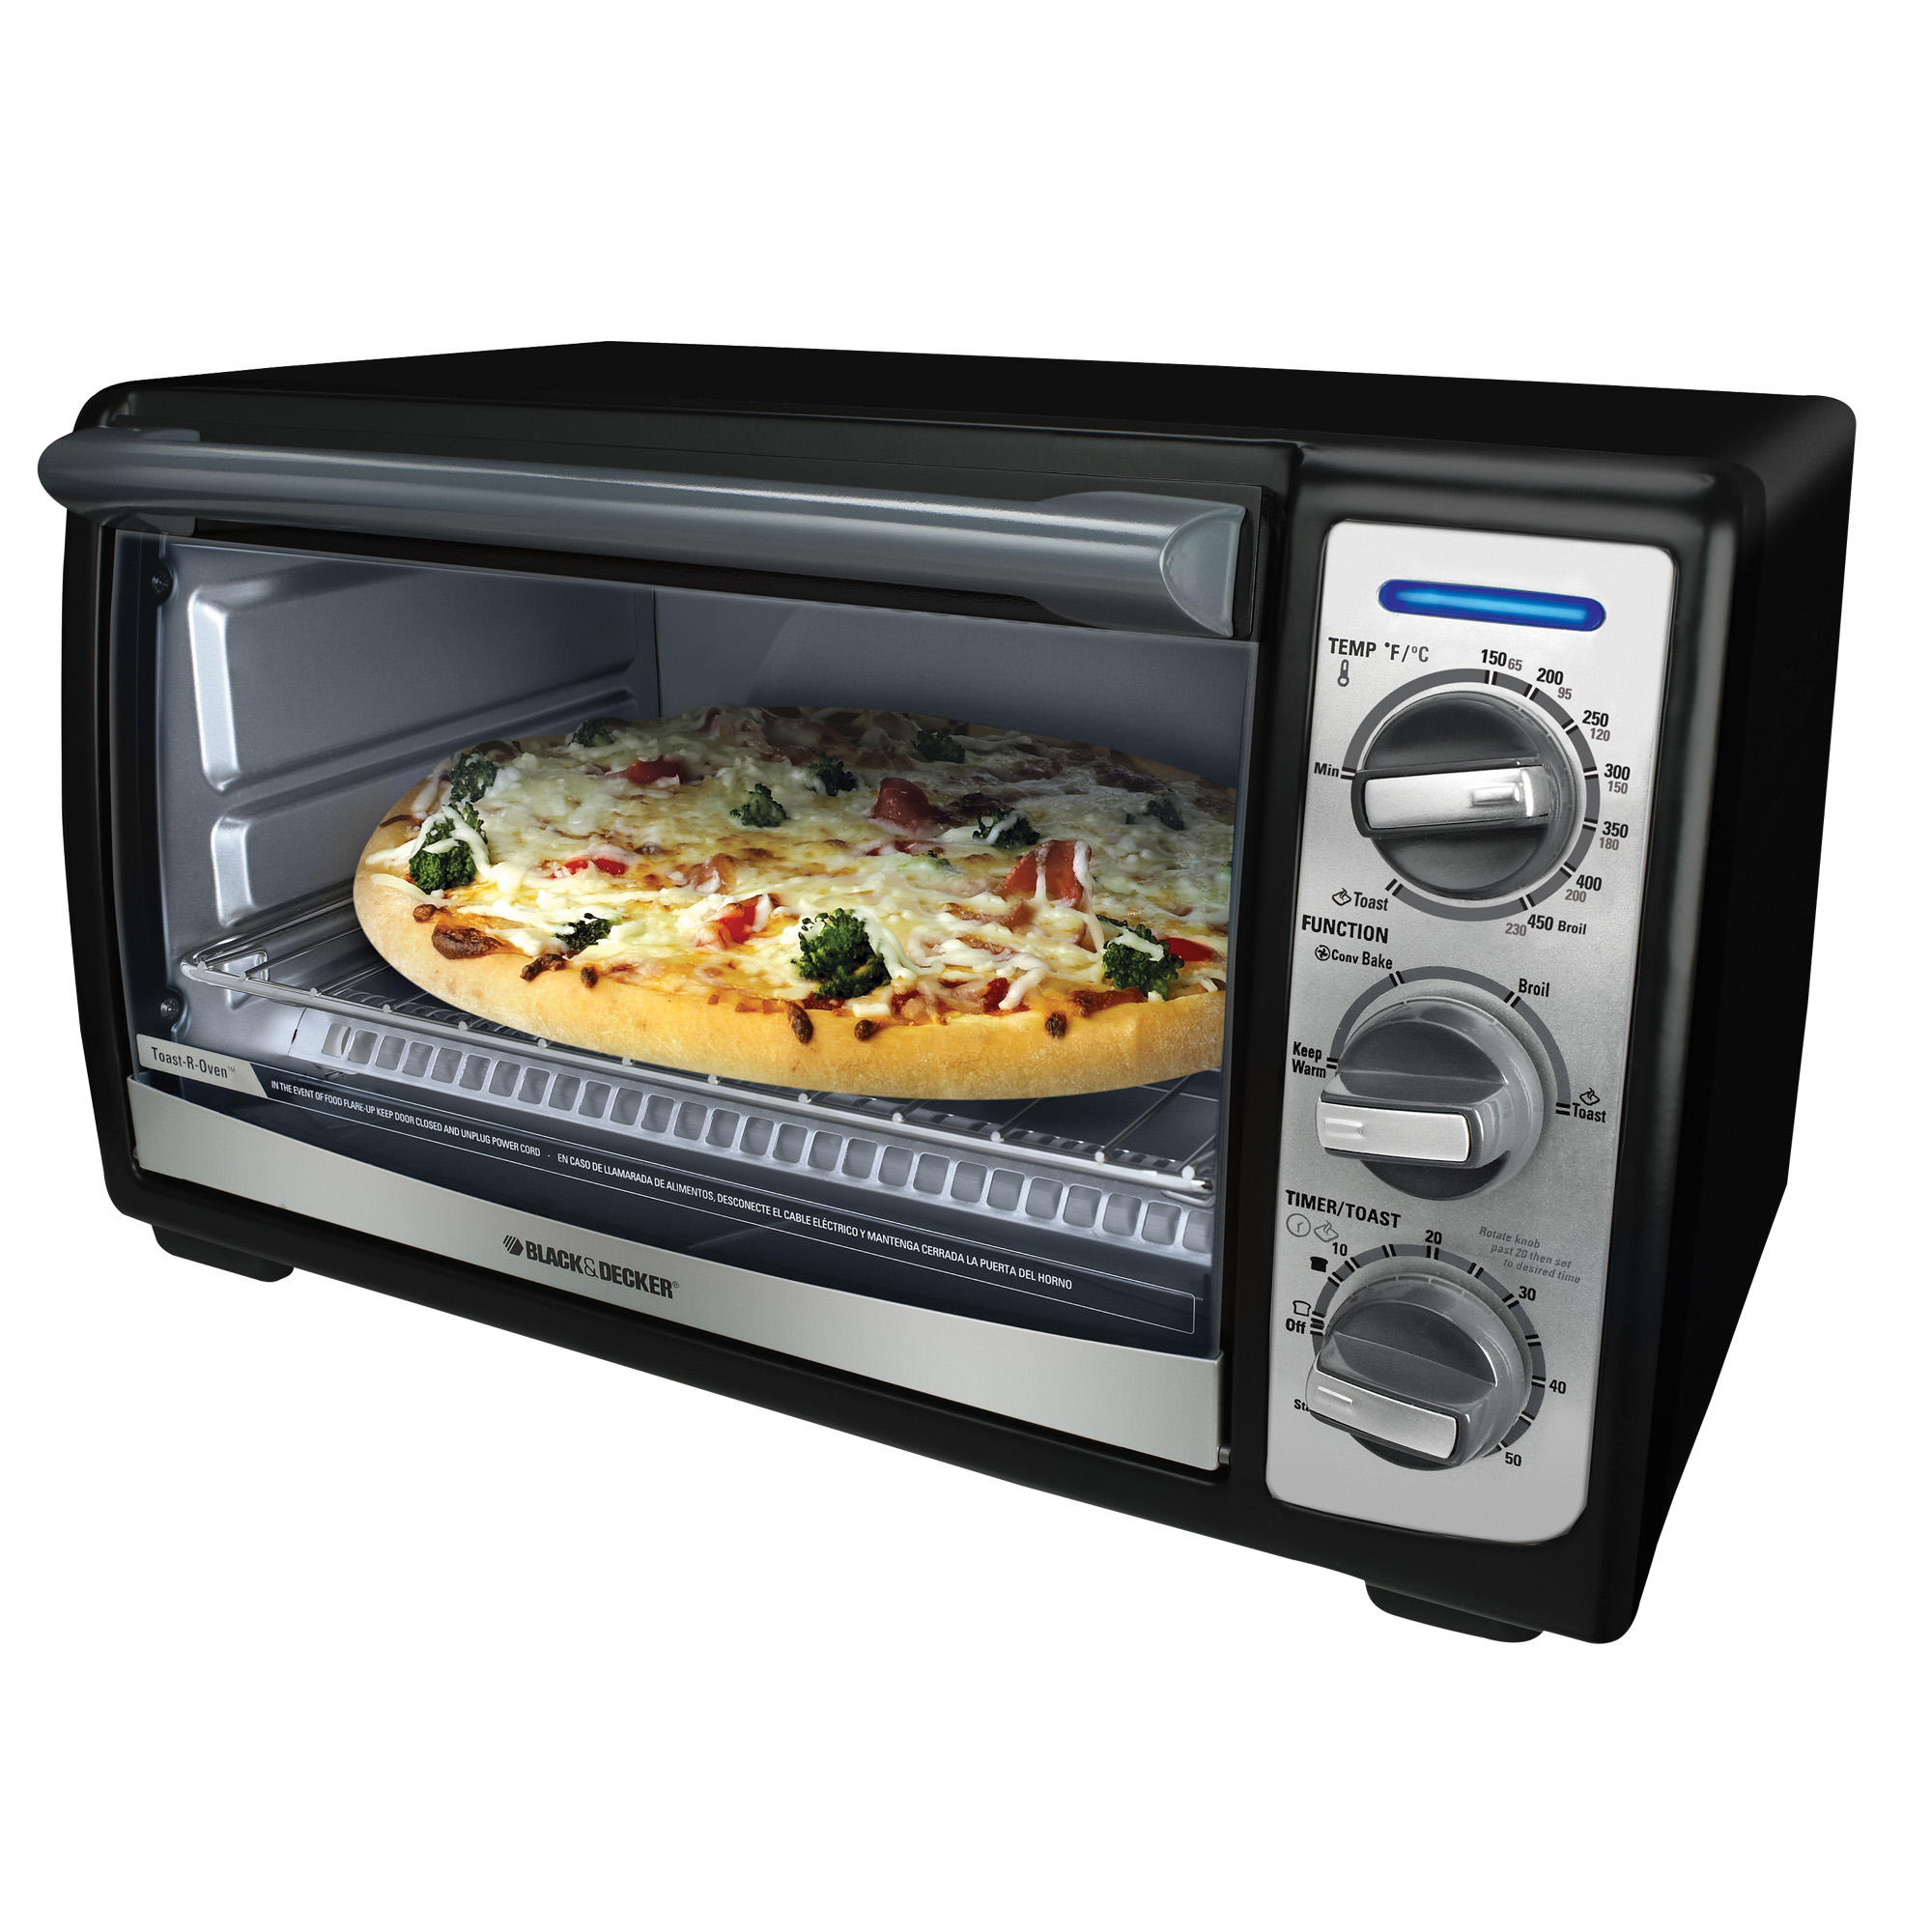 TRO4075B Toast-R-Oven by Black and Decker